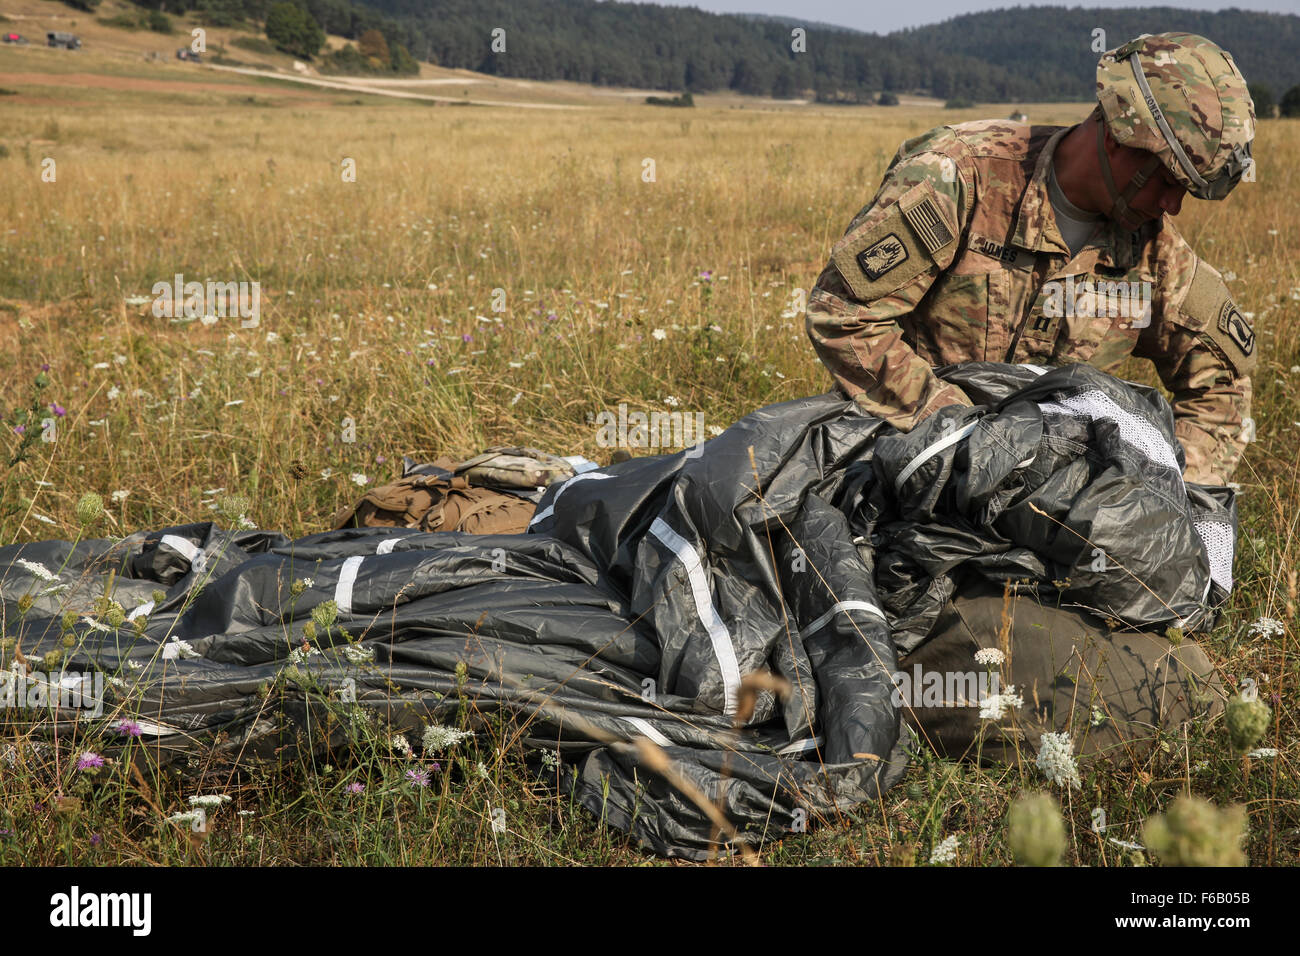 A U.S. Soldier, with the 1st Battalion, 503rd Infantry Regiment, 173rd Airborne Brigade Combat Team  Brigade, repacks his T-11 parachute while conducting airborne operations during exercise Allied Spirit II at the Hohenburg Drop Zone at the U.S. Army’s Joint Multinational Readiness Center in Hohenfels, Germany, Aug. 13, 2015. Allied Spirit is a multinational ground force training exercise designed to increase interoperability between U.S. and NATO forces. Stock Photo